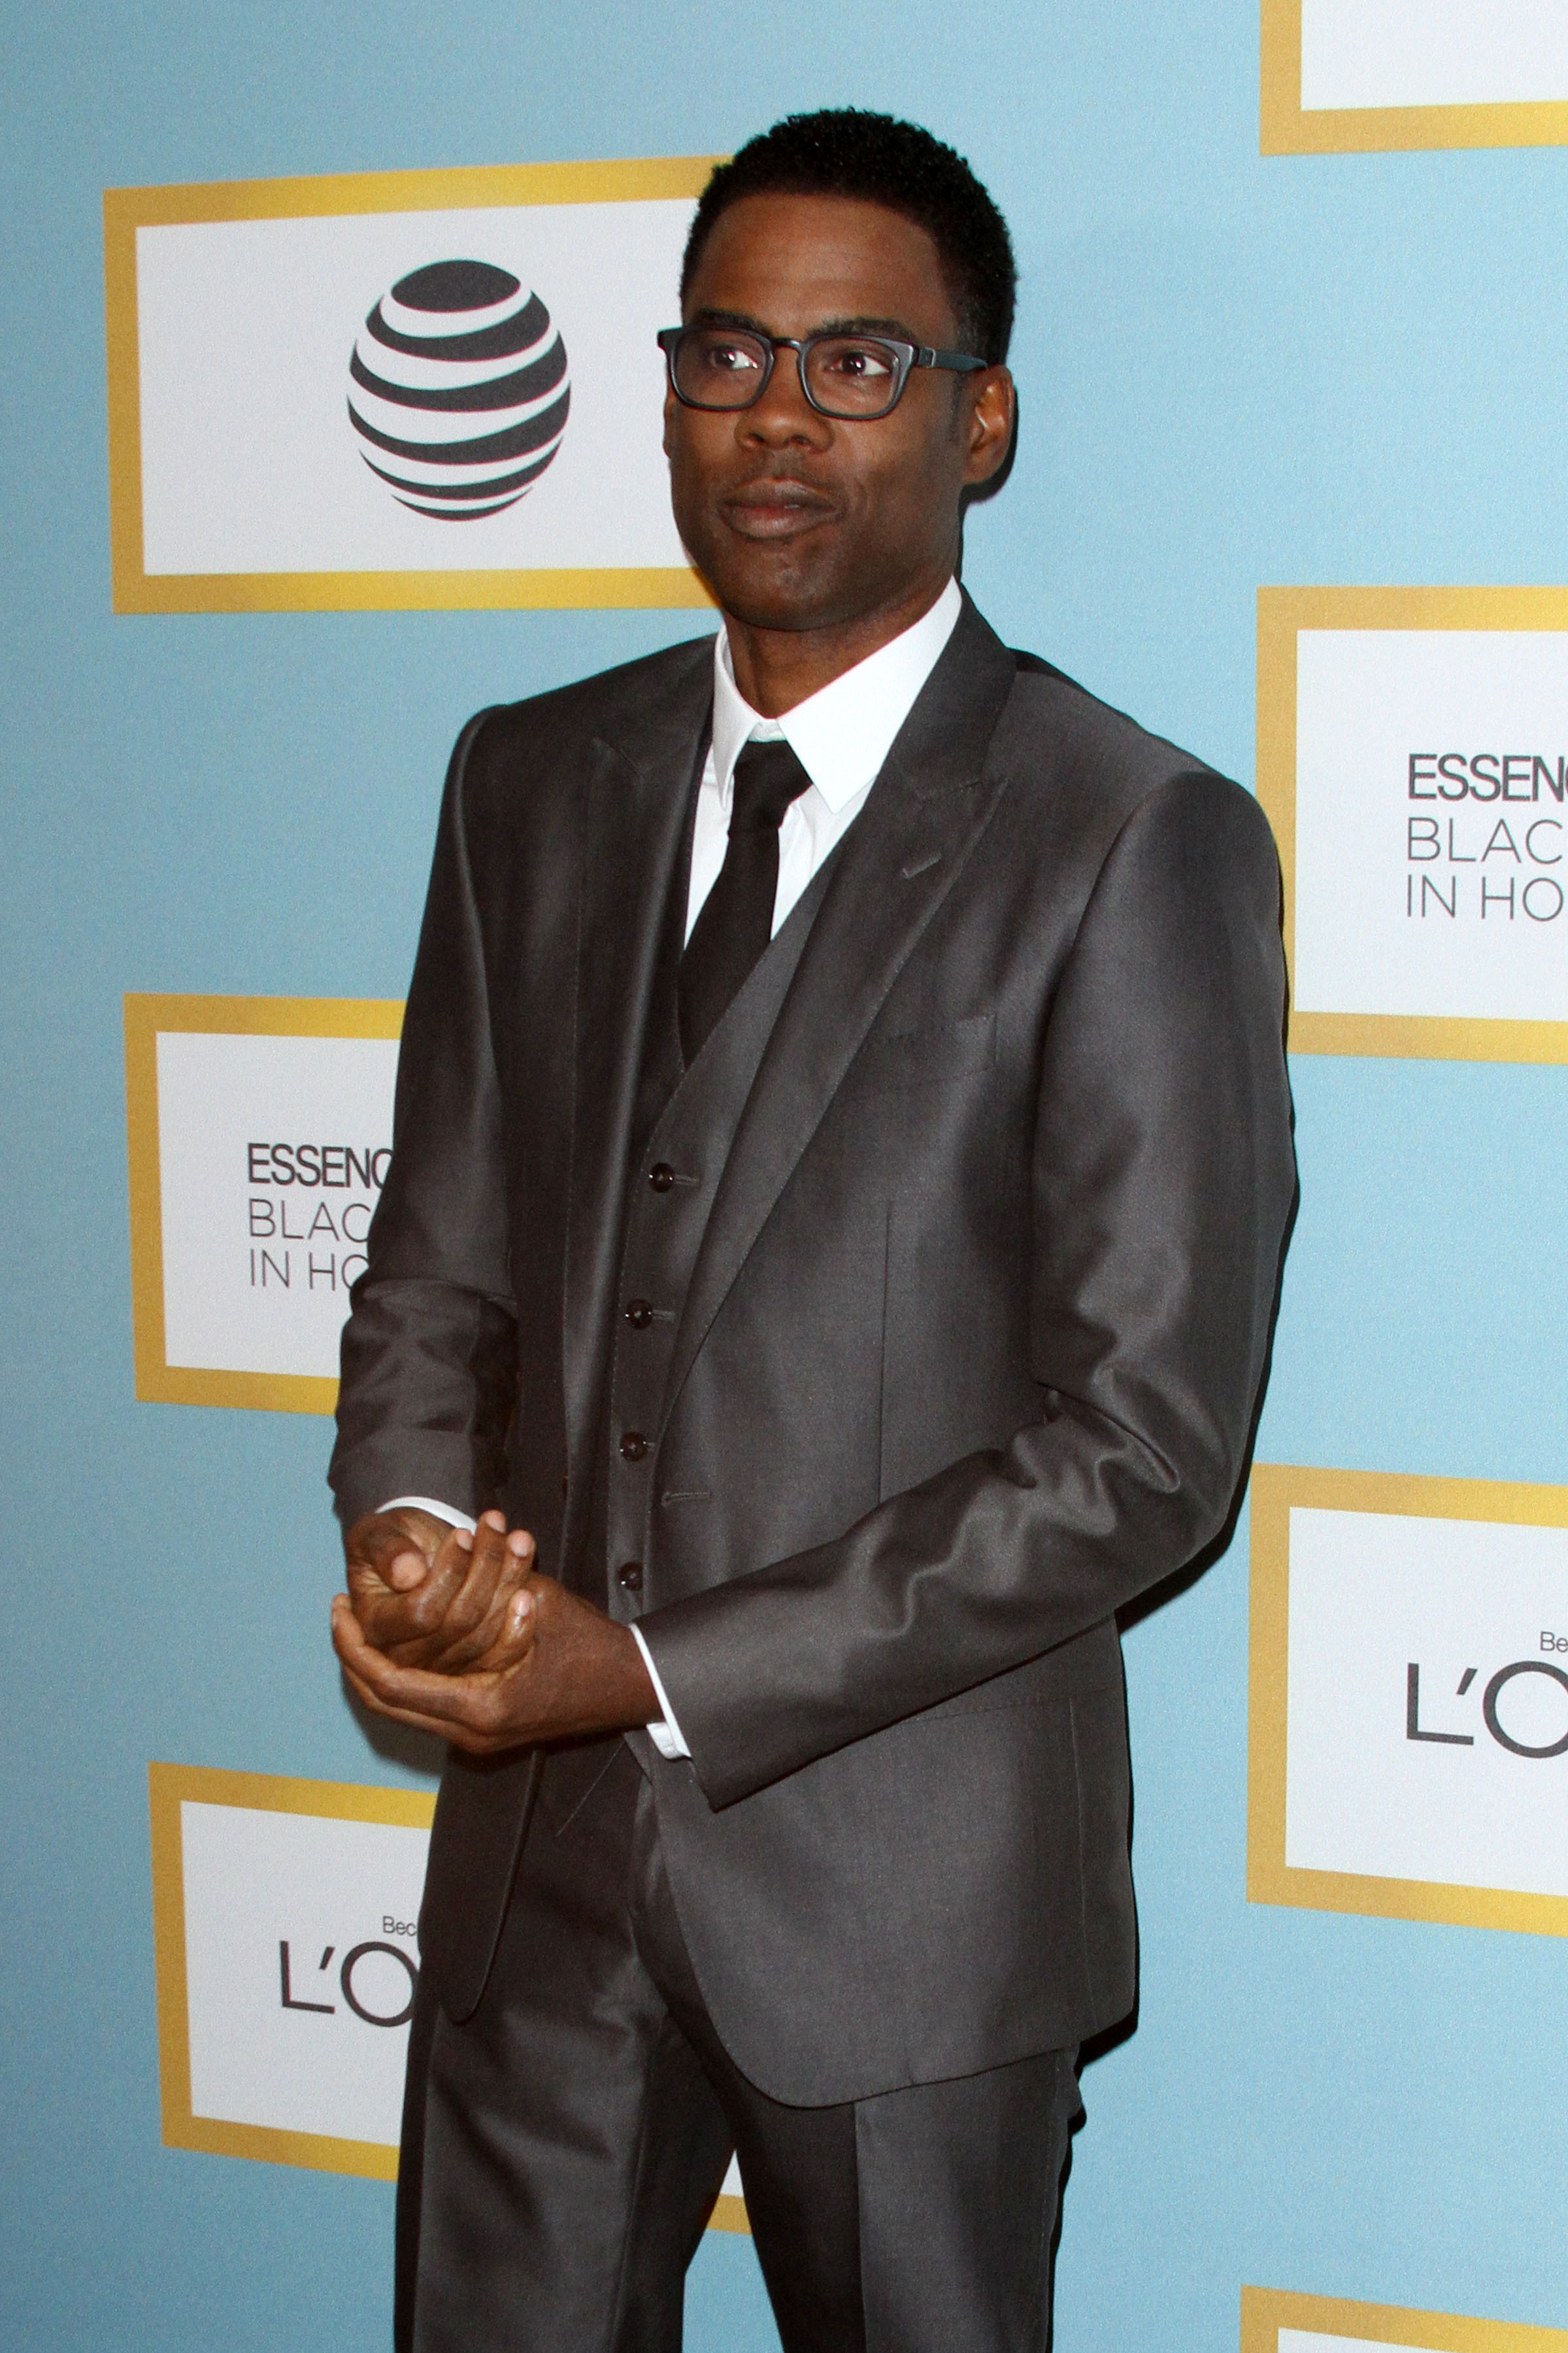 9th Annual Essence Black Women In Hollywood Luncheon 2016 held at the Beverly Wilshire Hotel in Beverly Hills Featuring: Chris Rock Where: Los Angeles, California, United States When: 25 Feb 2016 Credit: Adriana M. Barraza/WENN.com